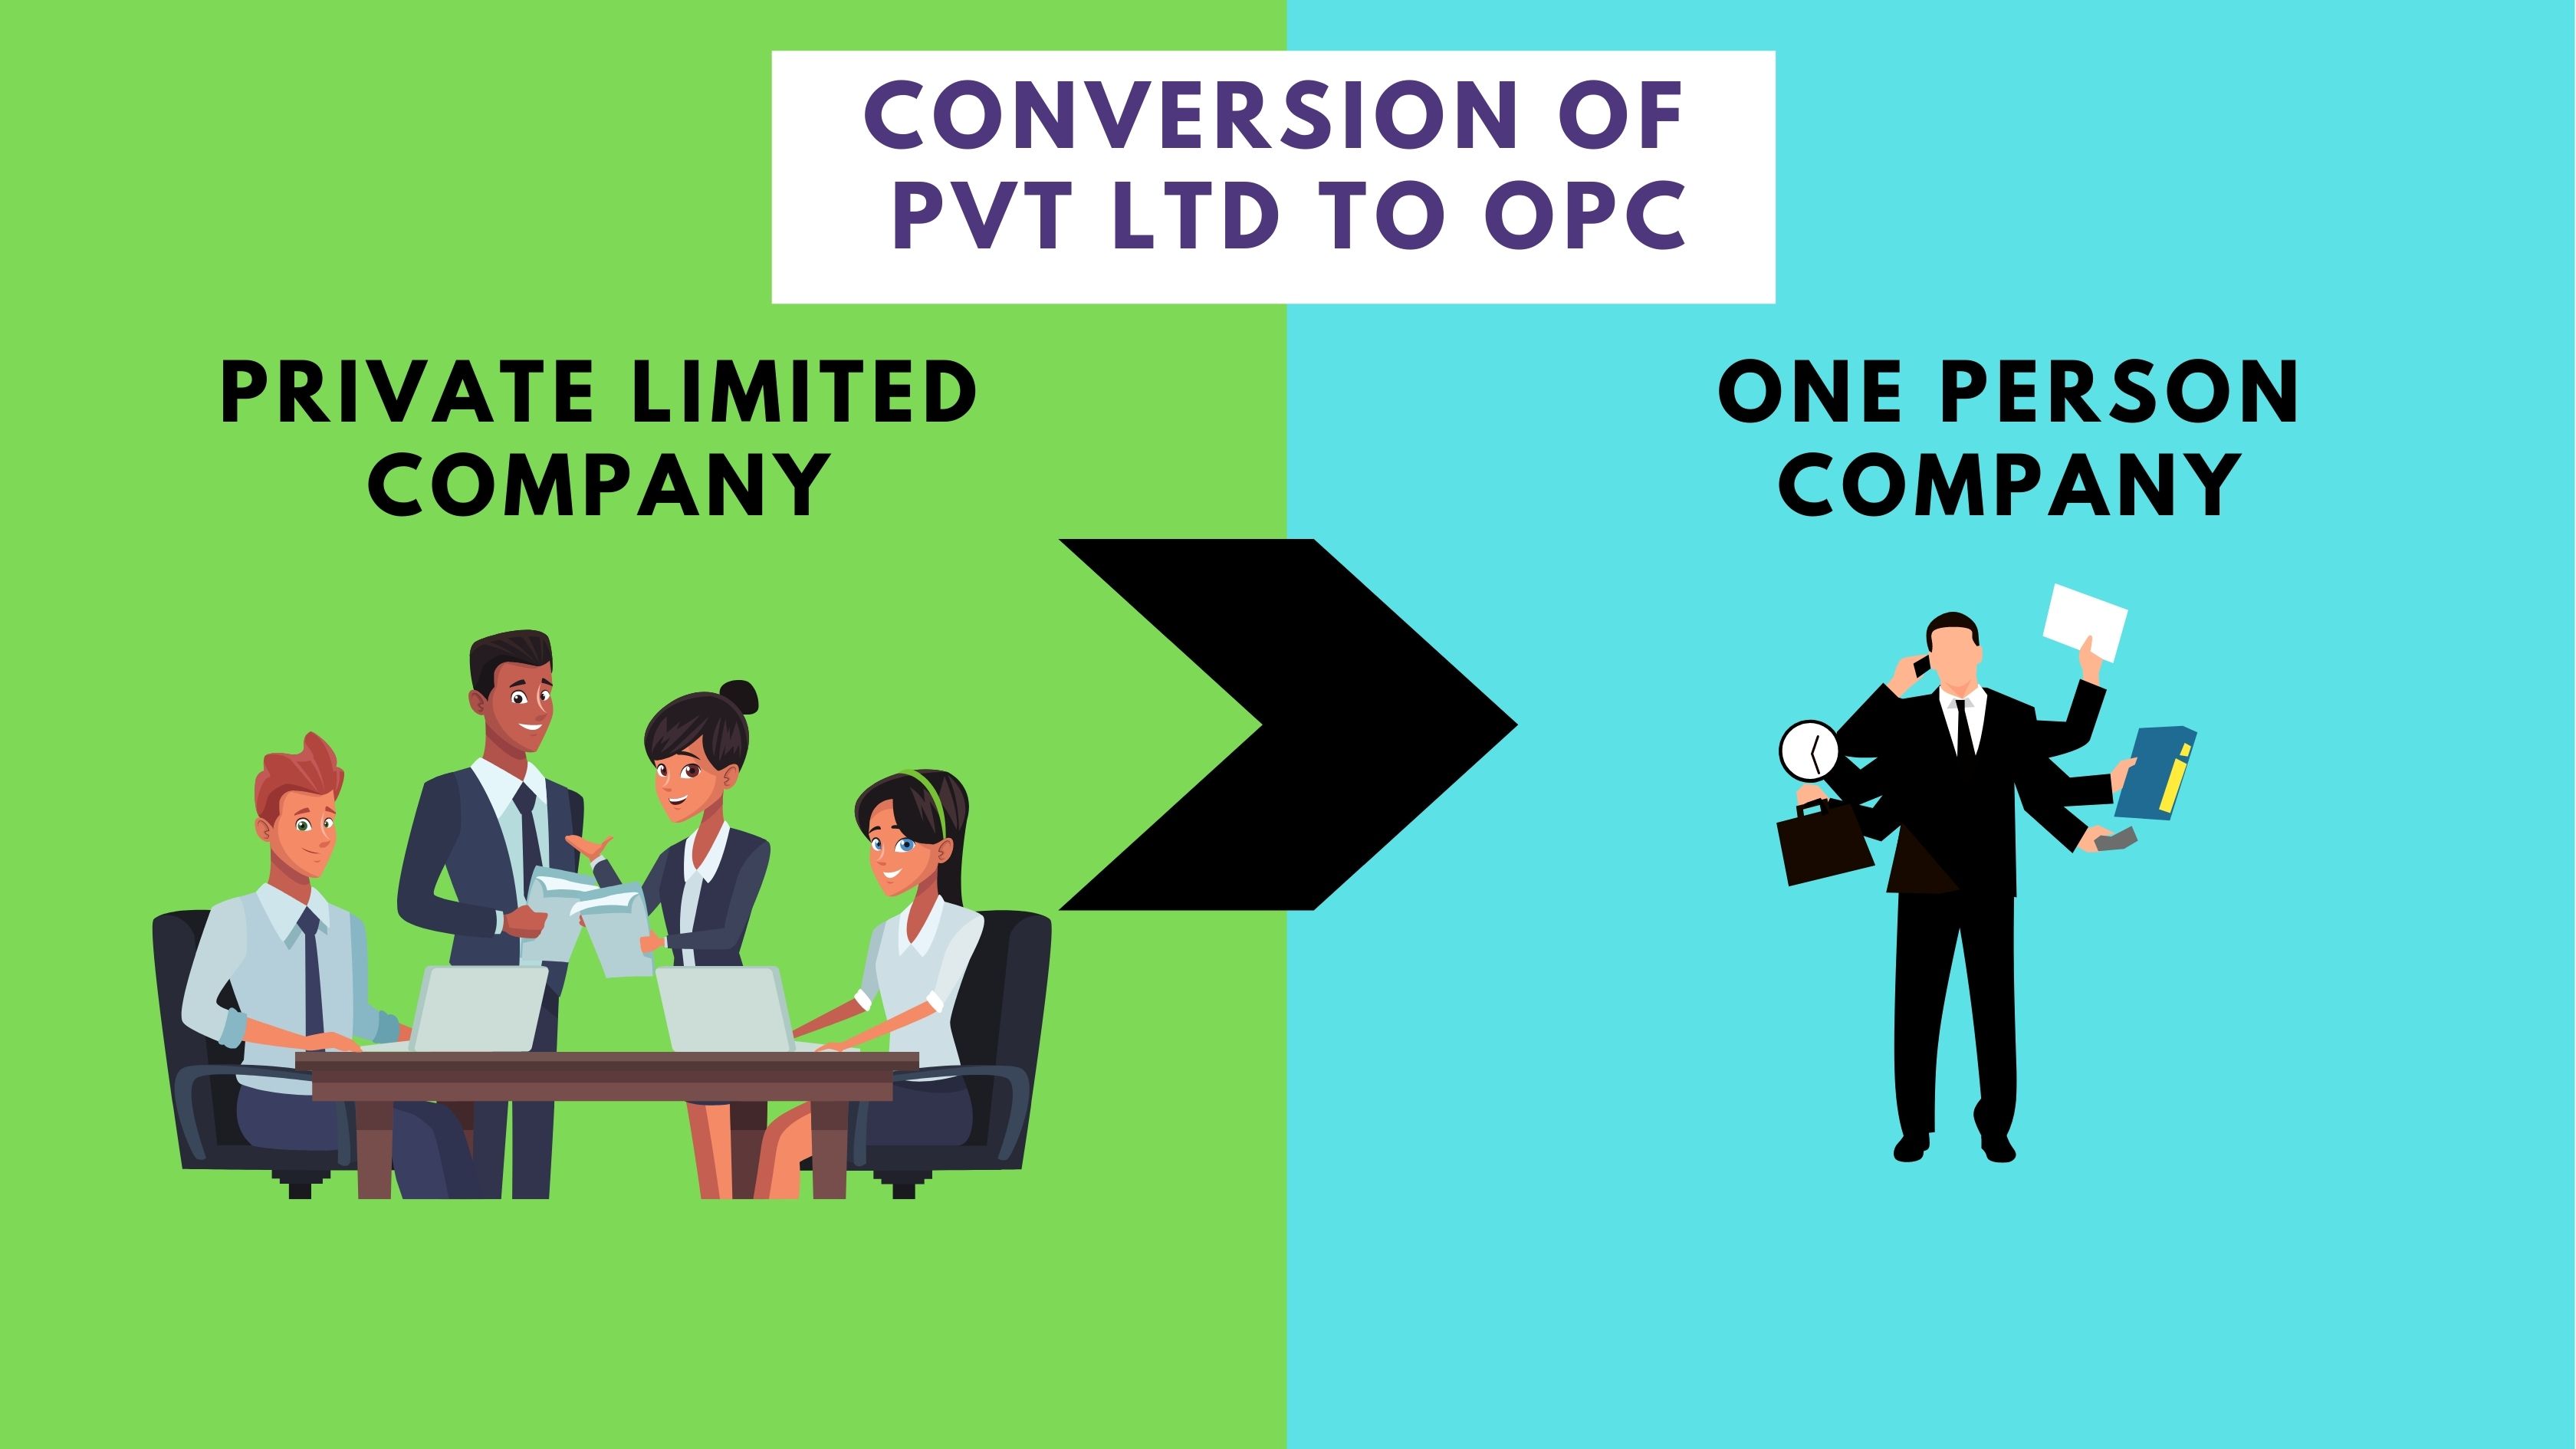 Conversion of Private limited company to One person company